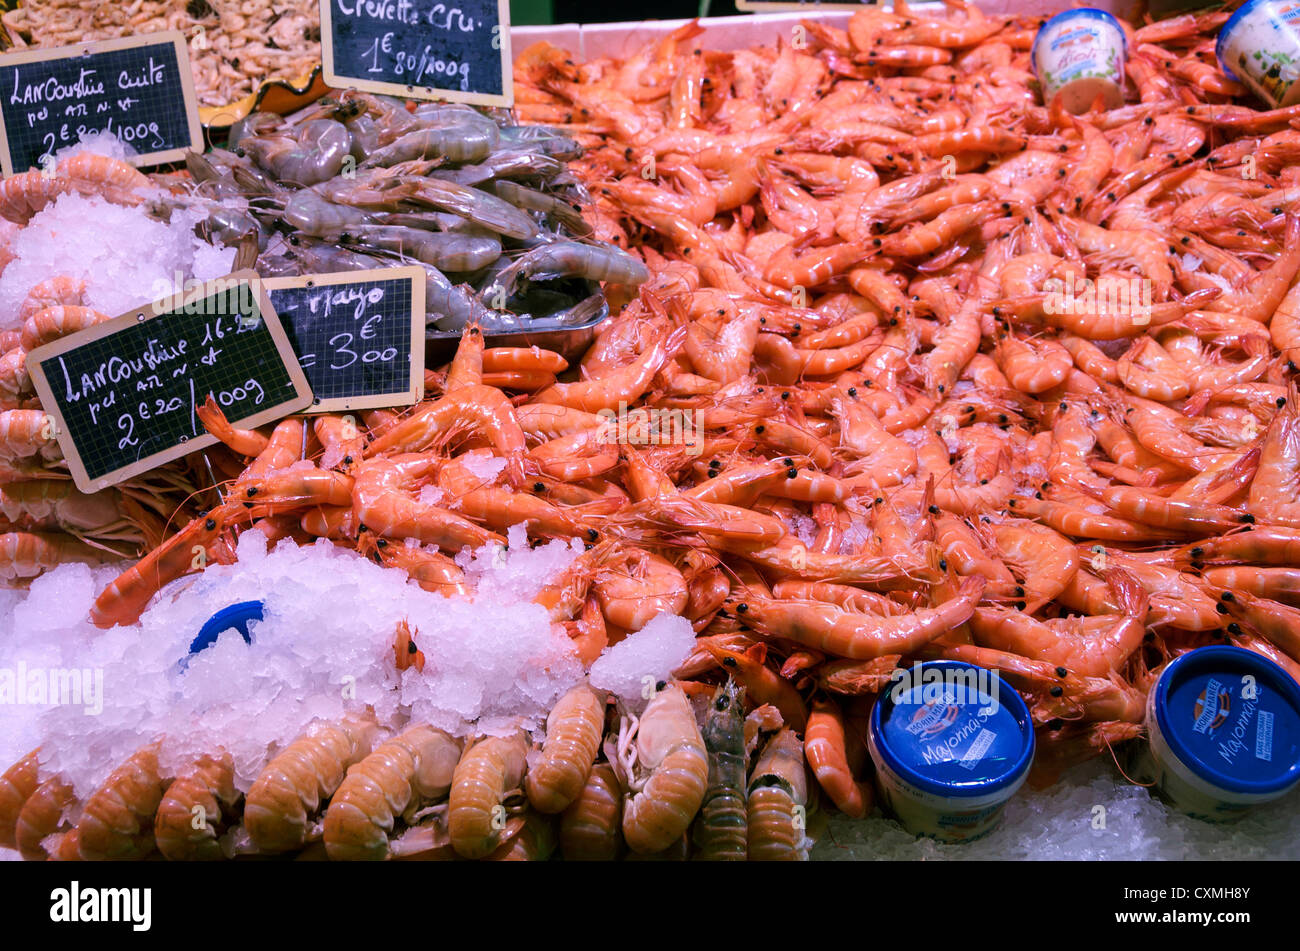 Fresh seafood for sale on a market stall, France, Europe Stock Photo